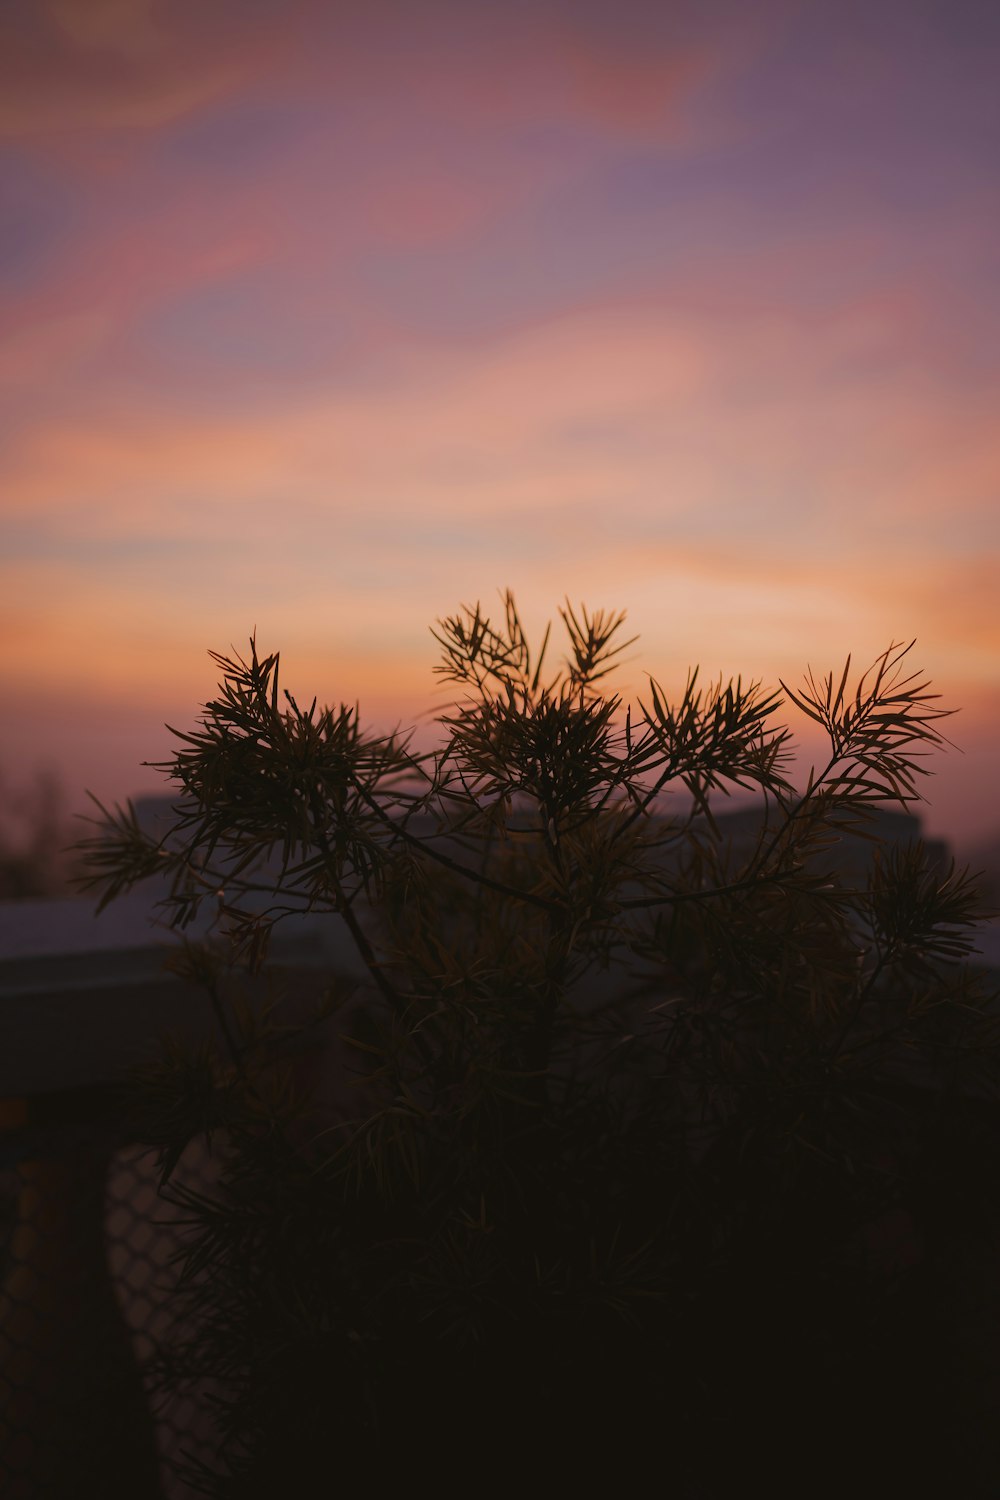 a pine tree is silhouetted against a sunset